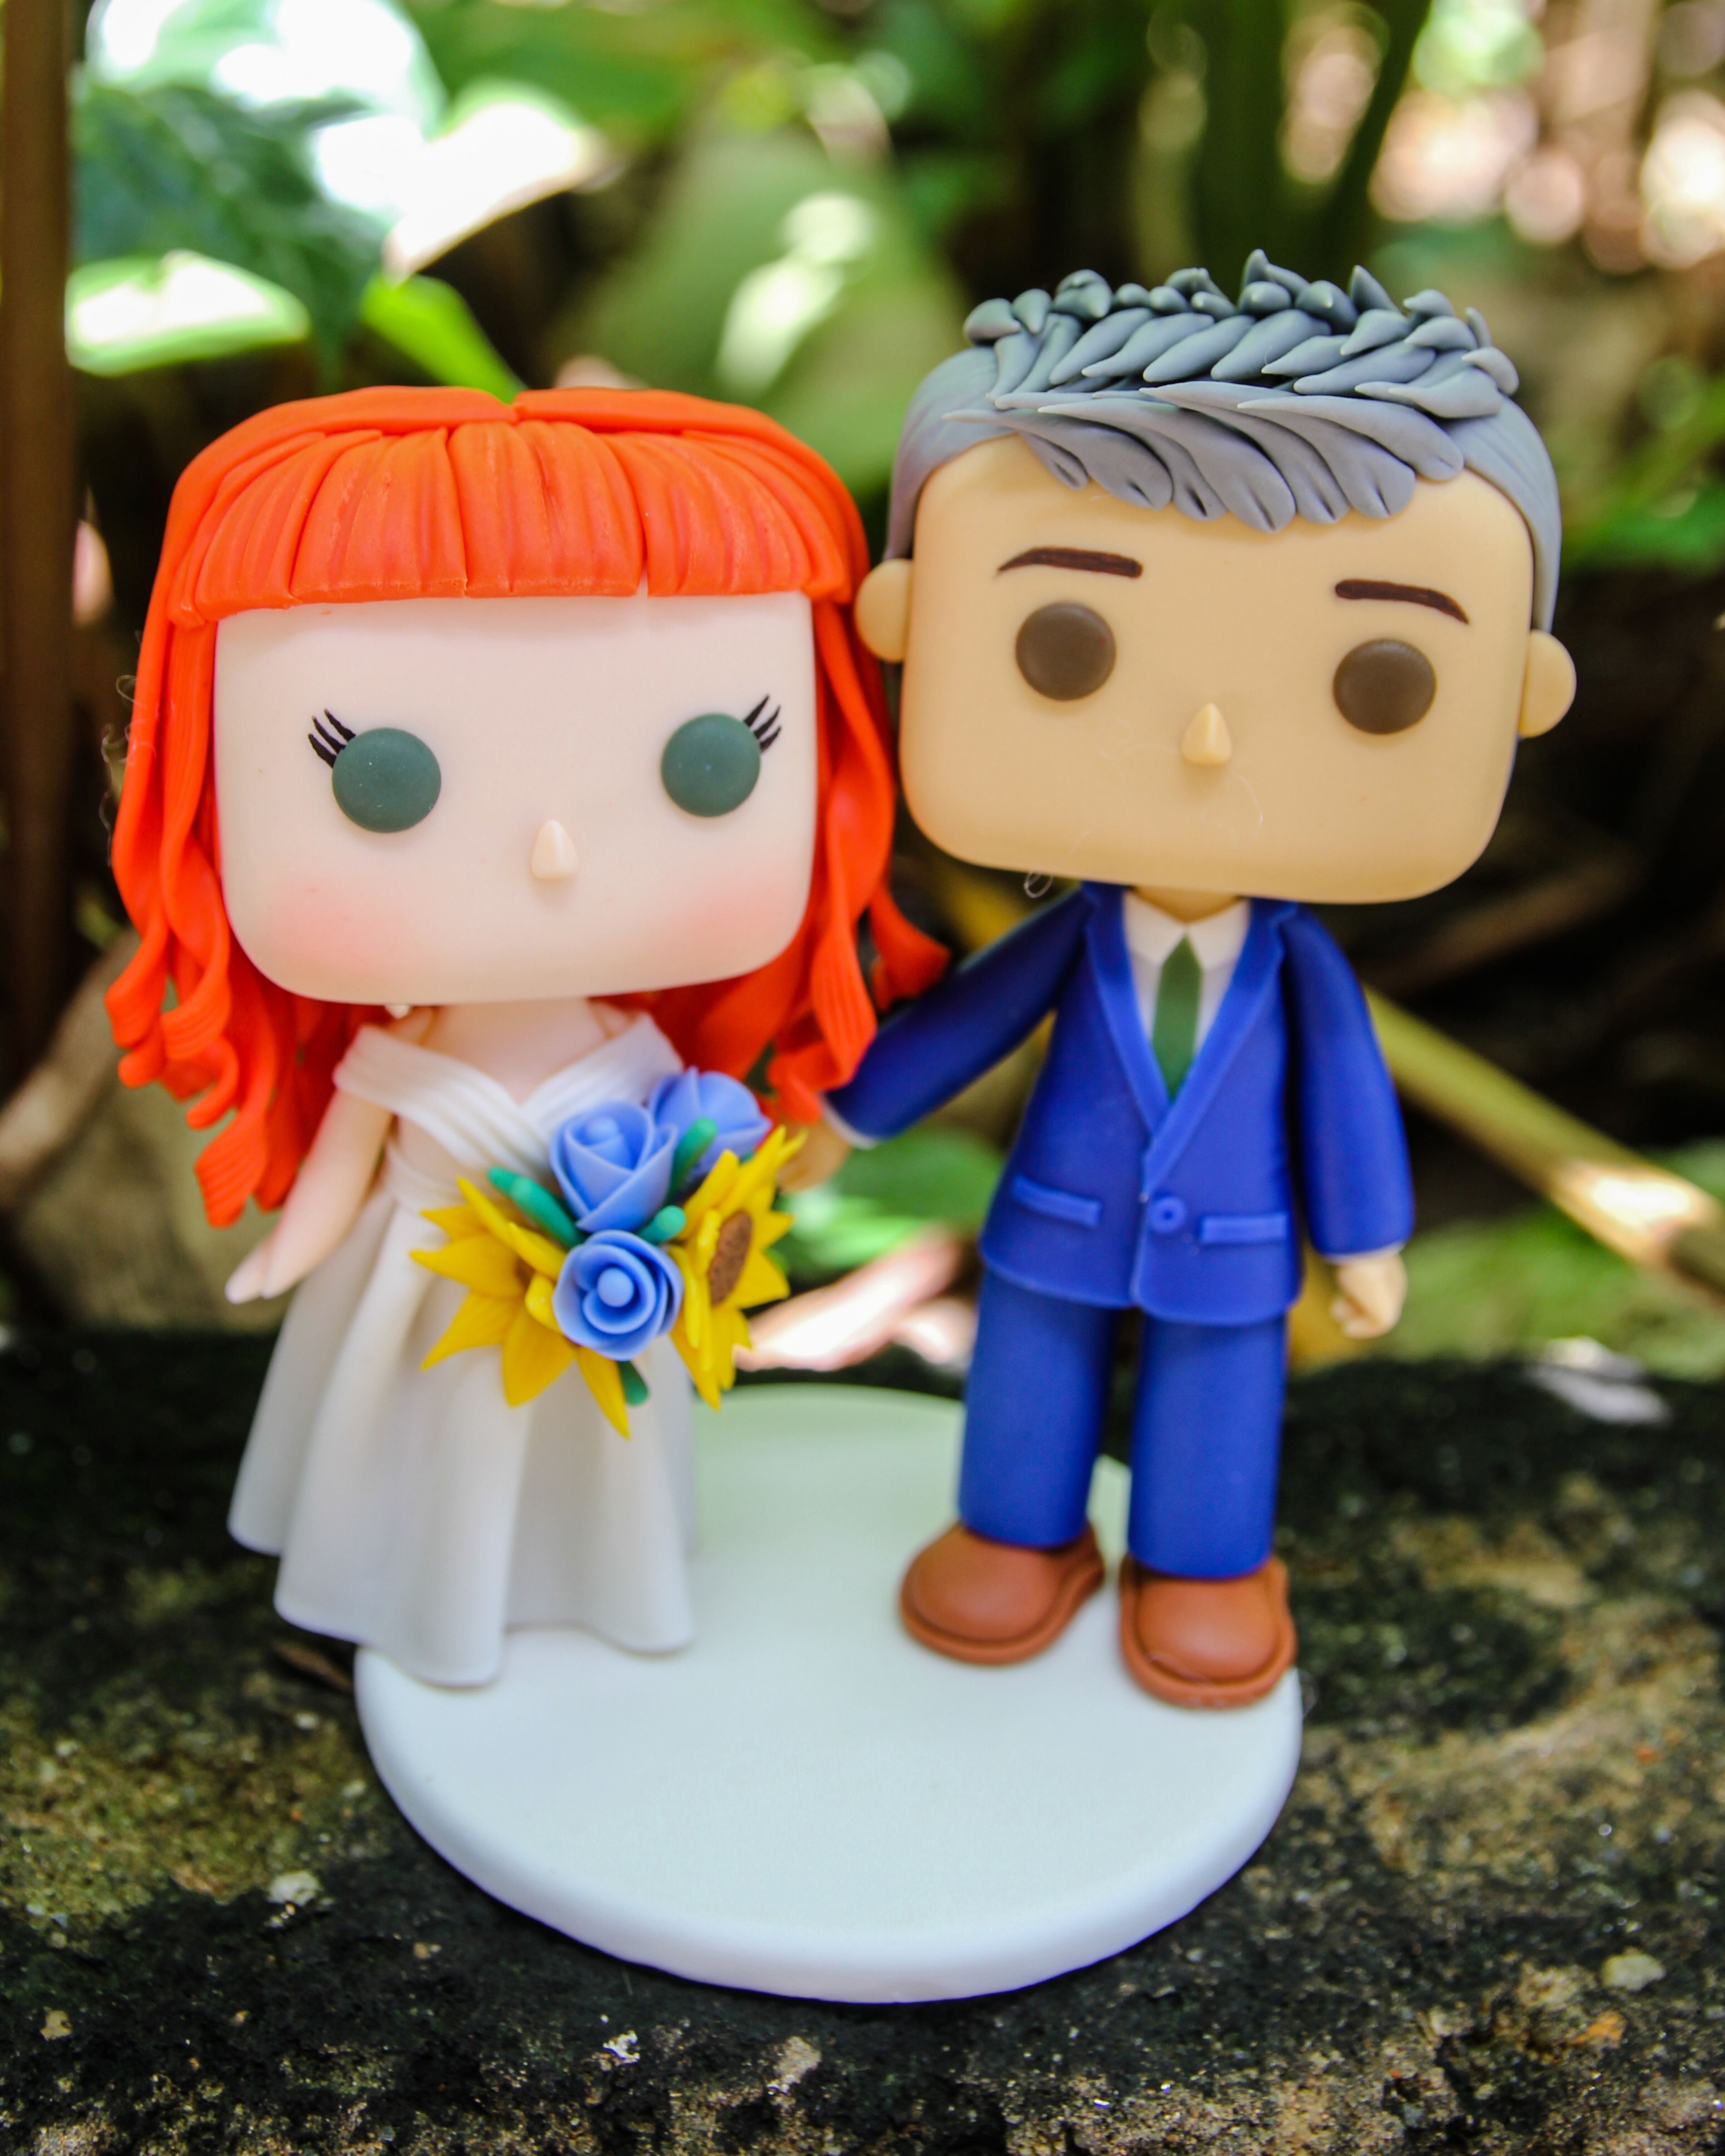 Picture of Custom Funko Pop Wedding Cake Topper, Gray-Haired Groom and Orange-Haired Bride Wedding Cake Topper